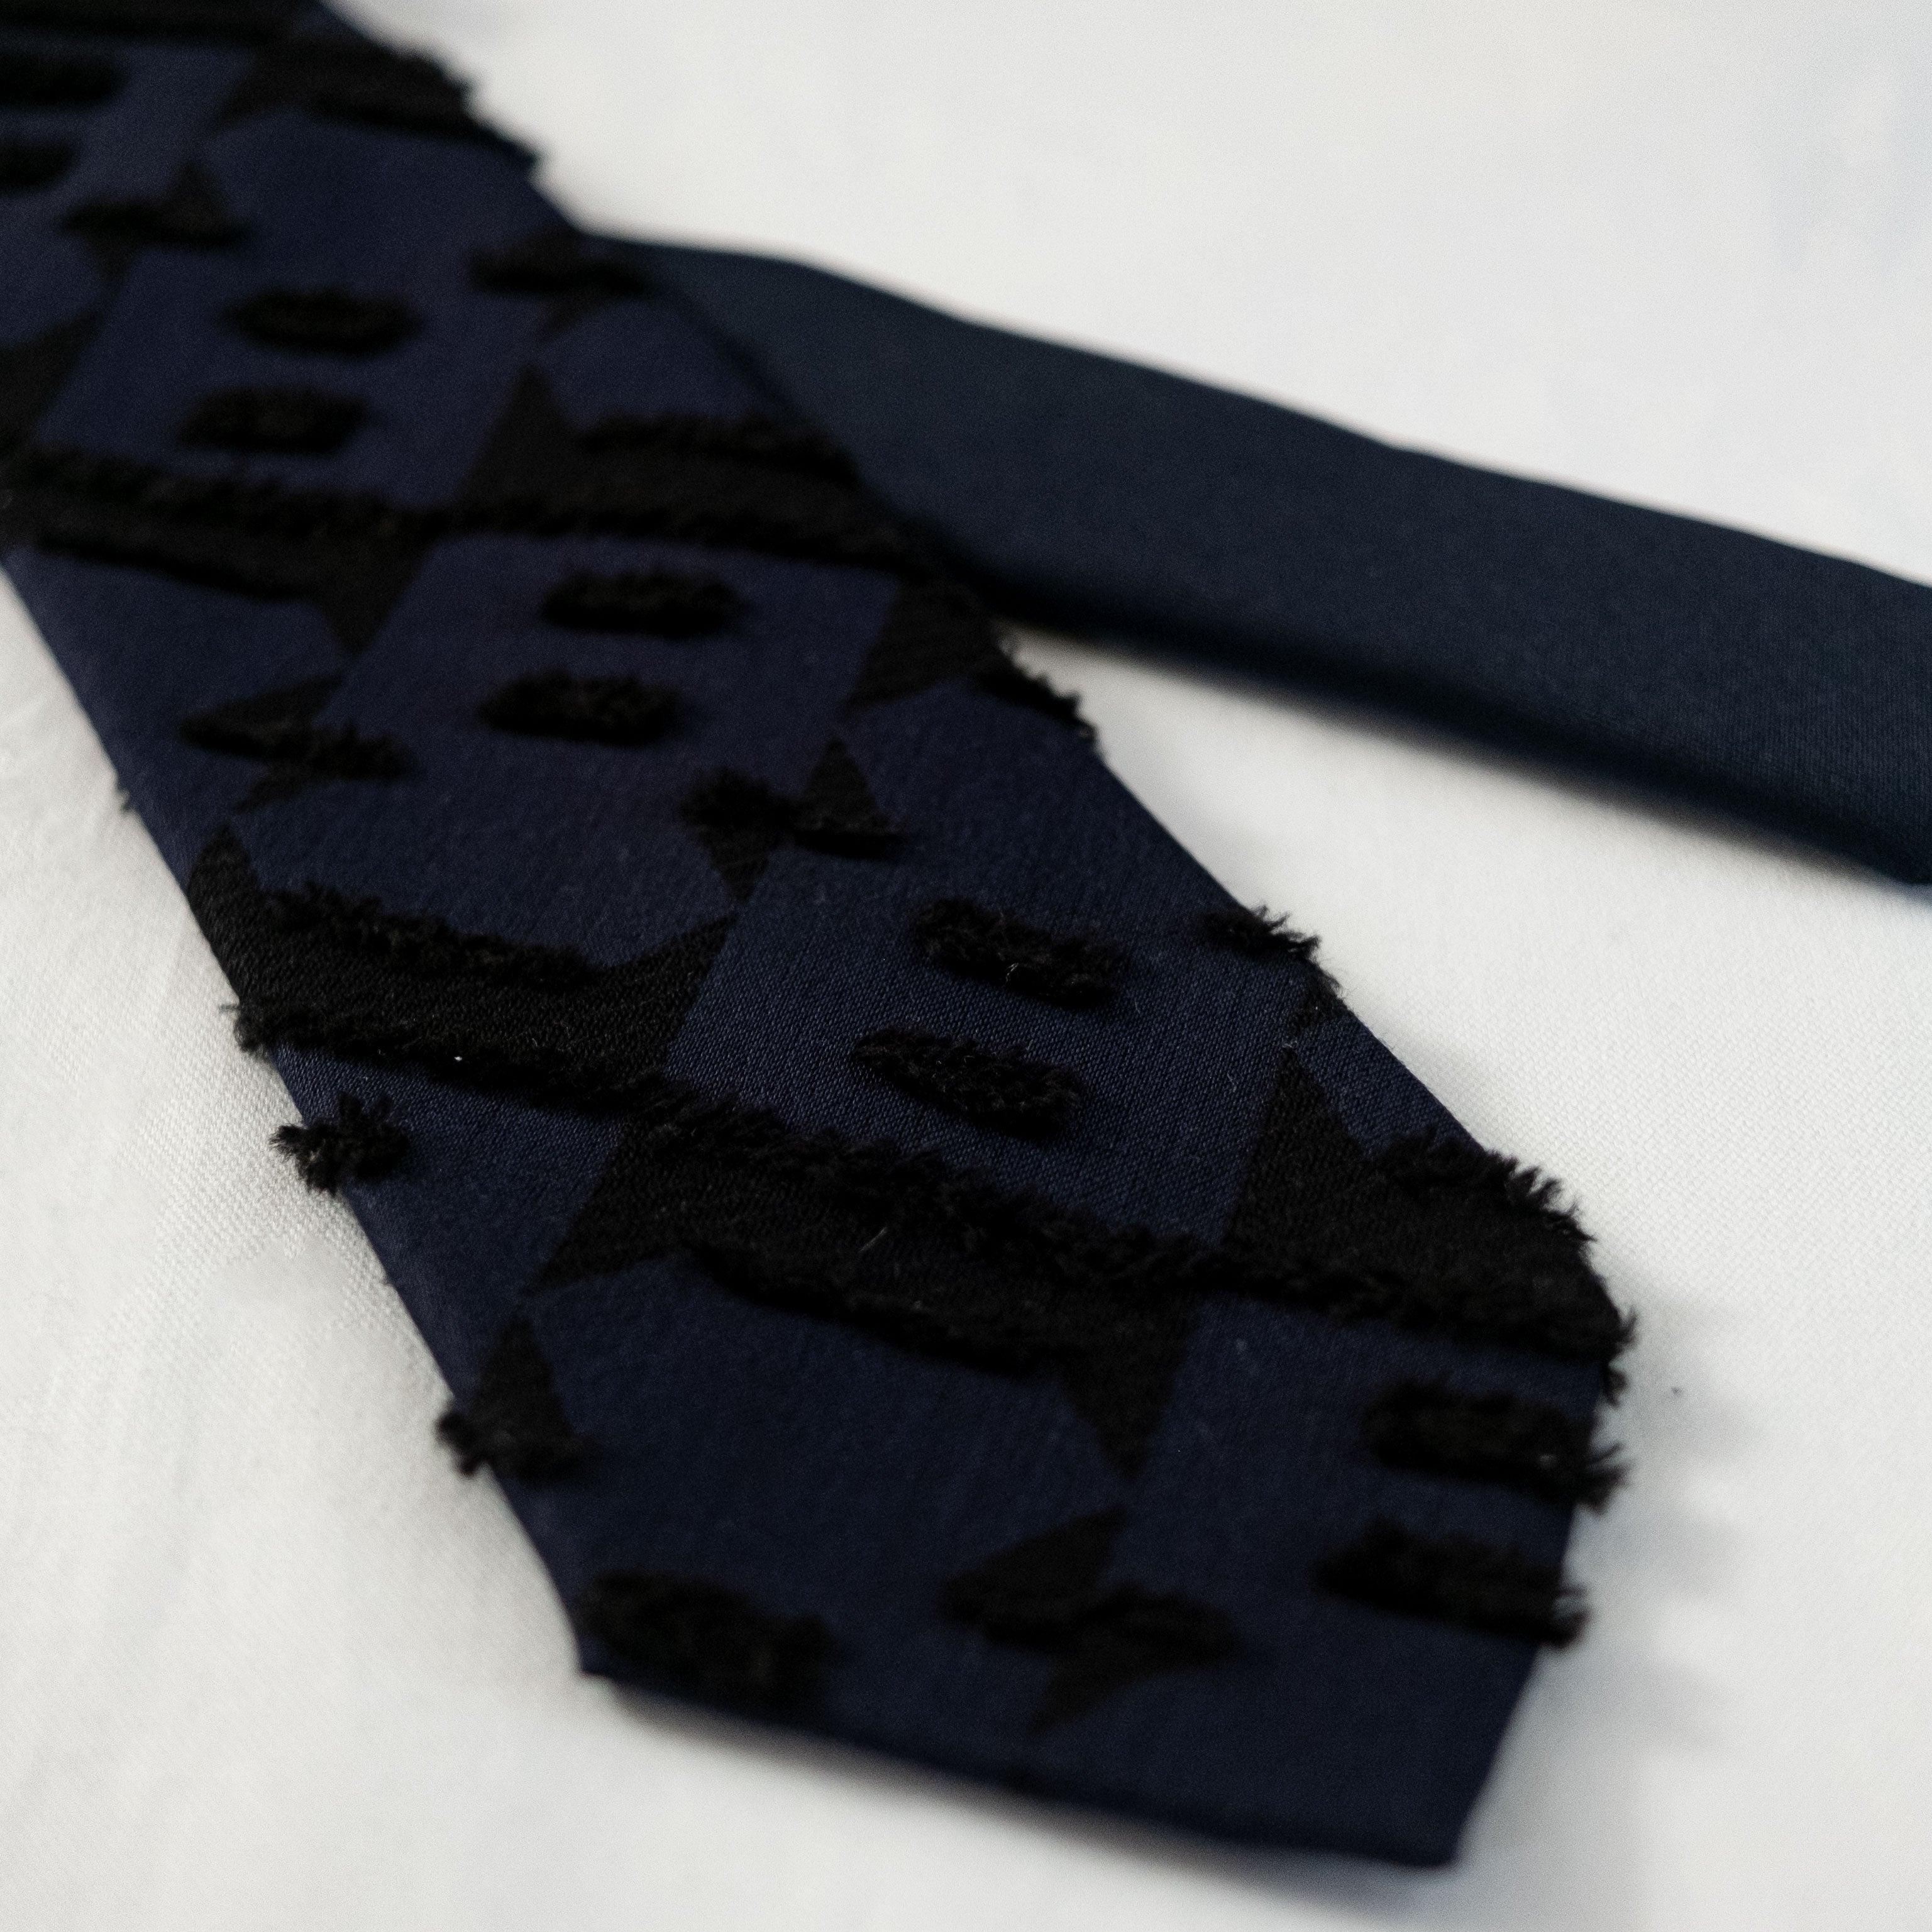 Banshu Tie - Soiree｜Collaboration with 劇団四季